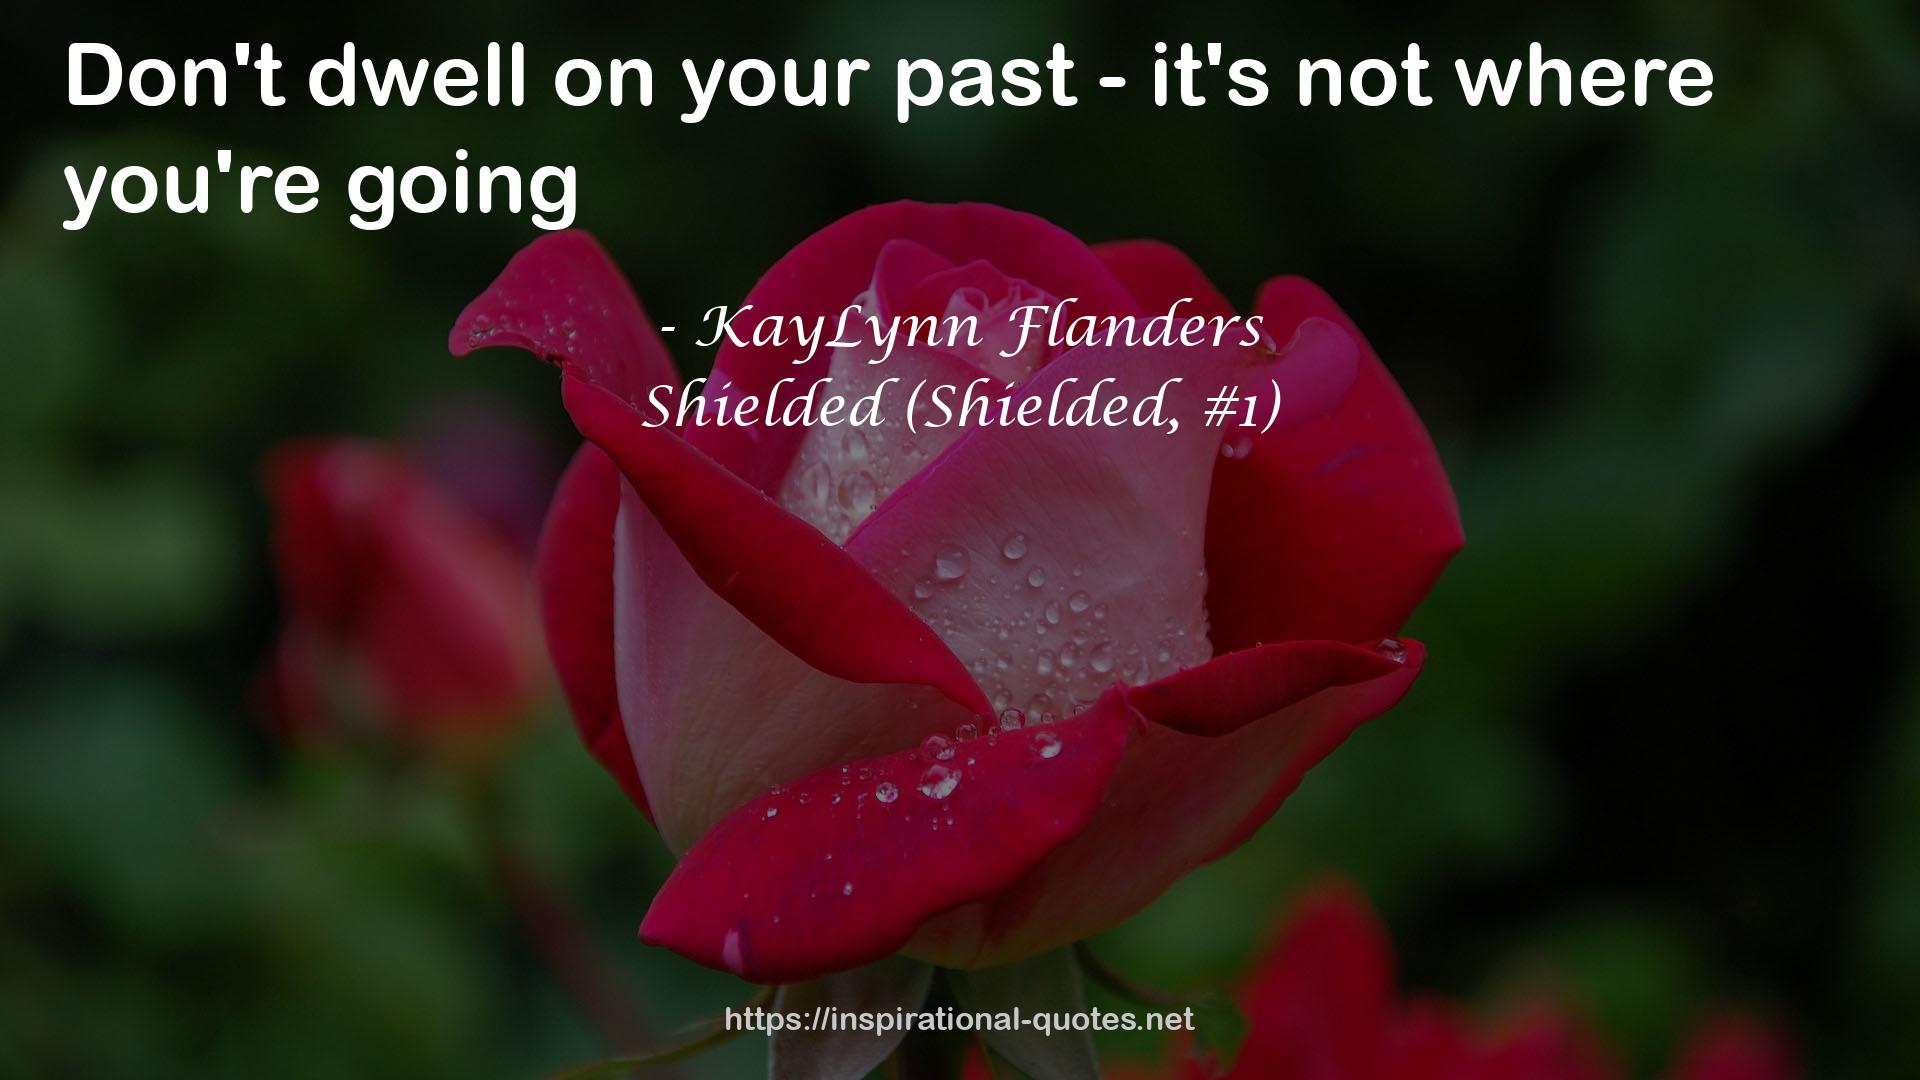 Shielded (Shielded, #1) QUOTES